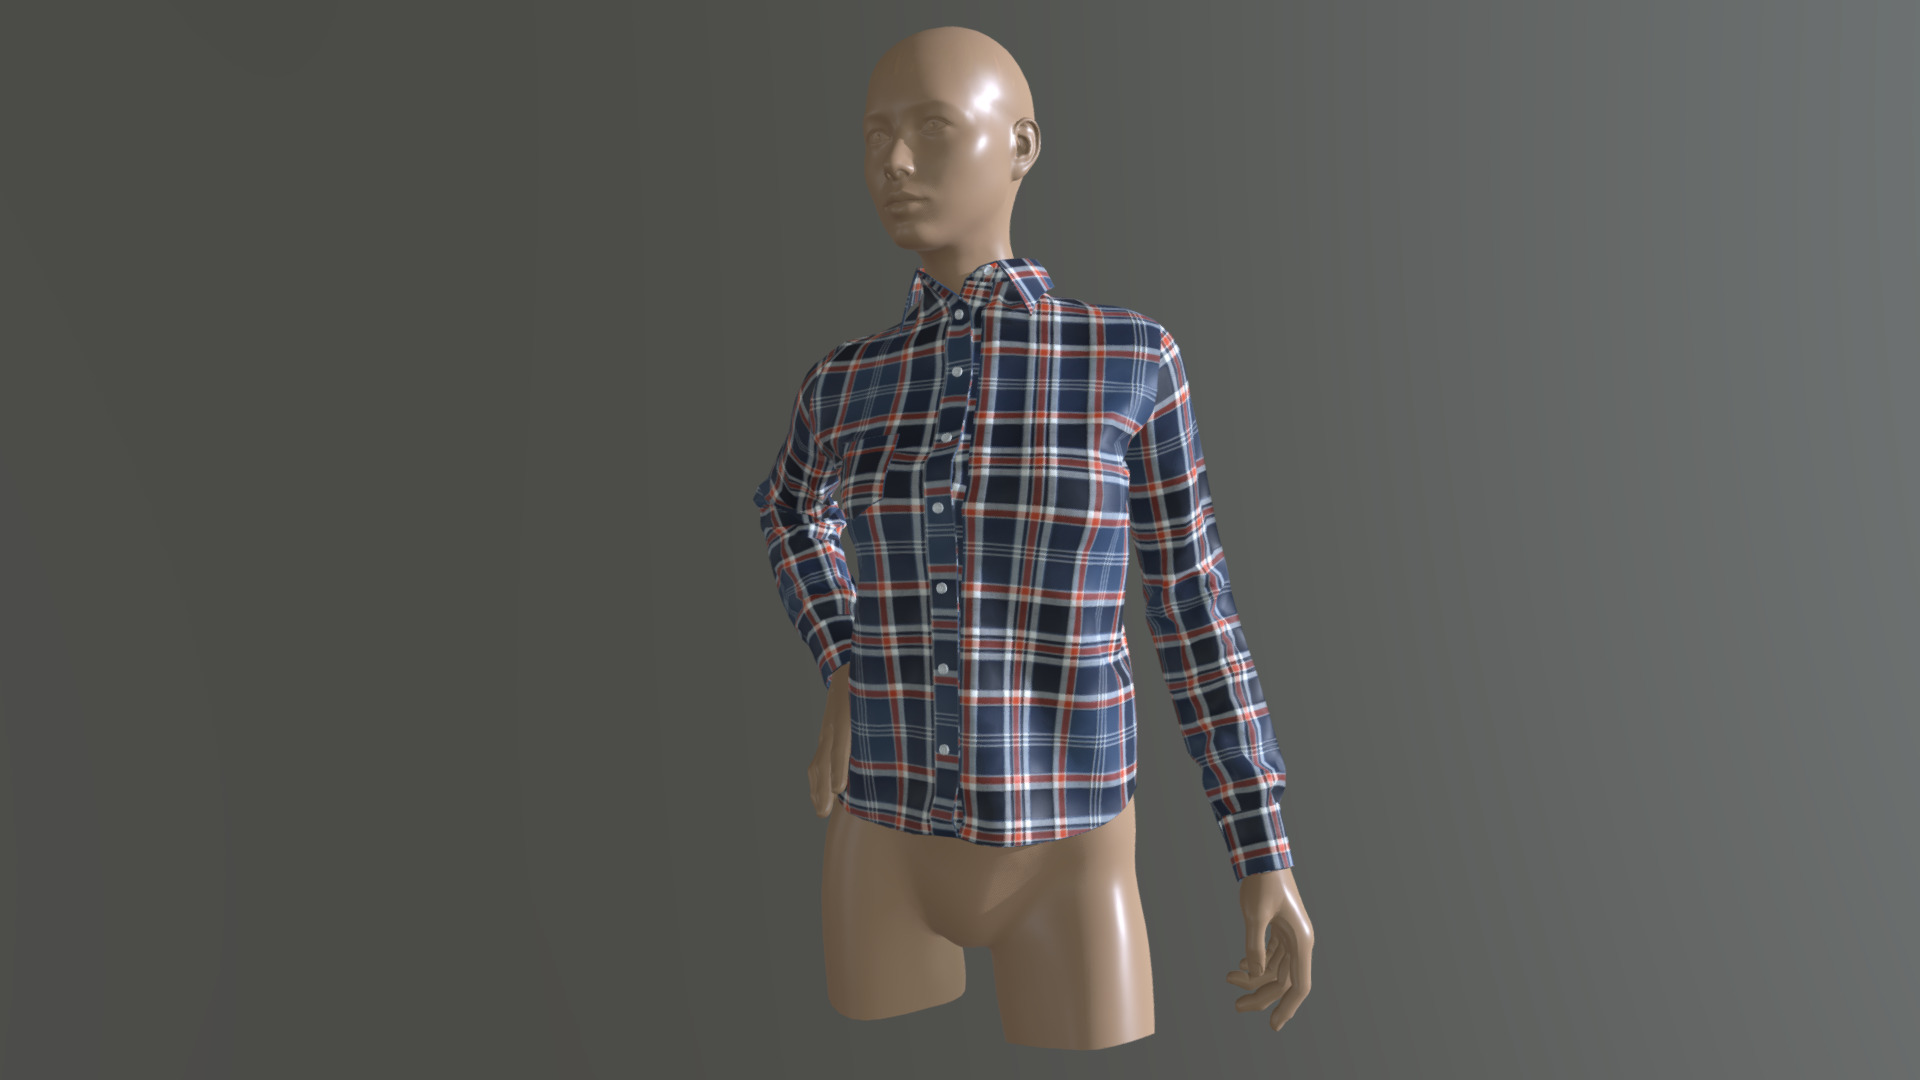 3D model Shirt 12_5 - This is a 3D model of the Shirt 12_5. The 3D model is about a mannequin wearing a plaid shirt and a blue and white checkered shirt.